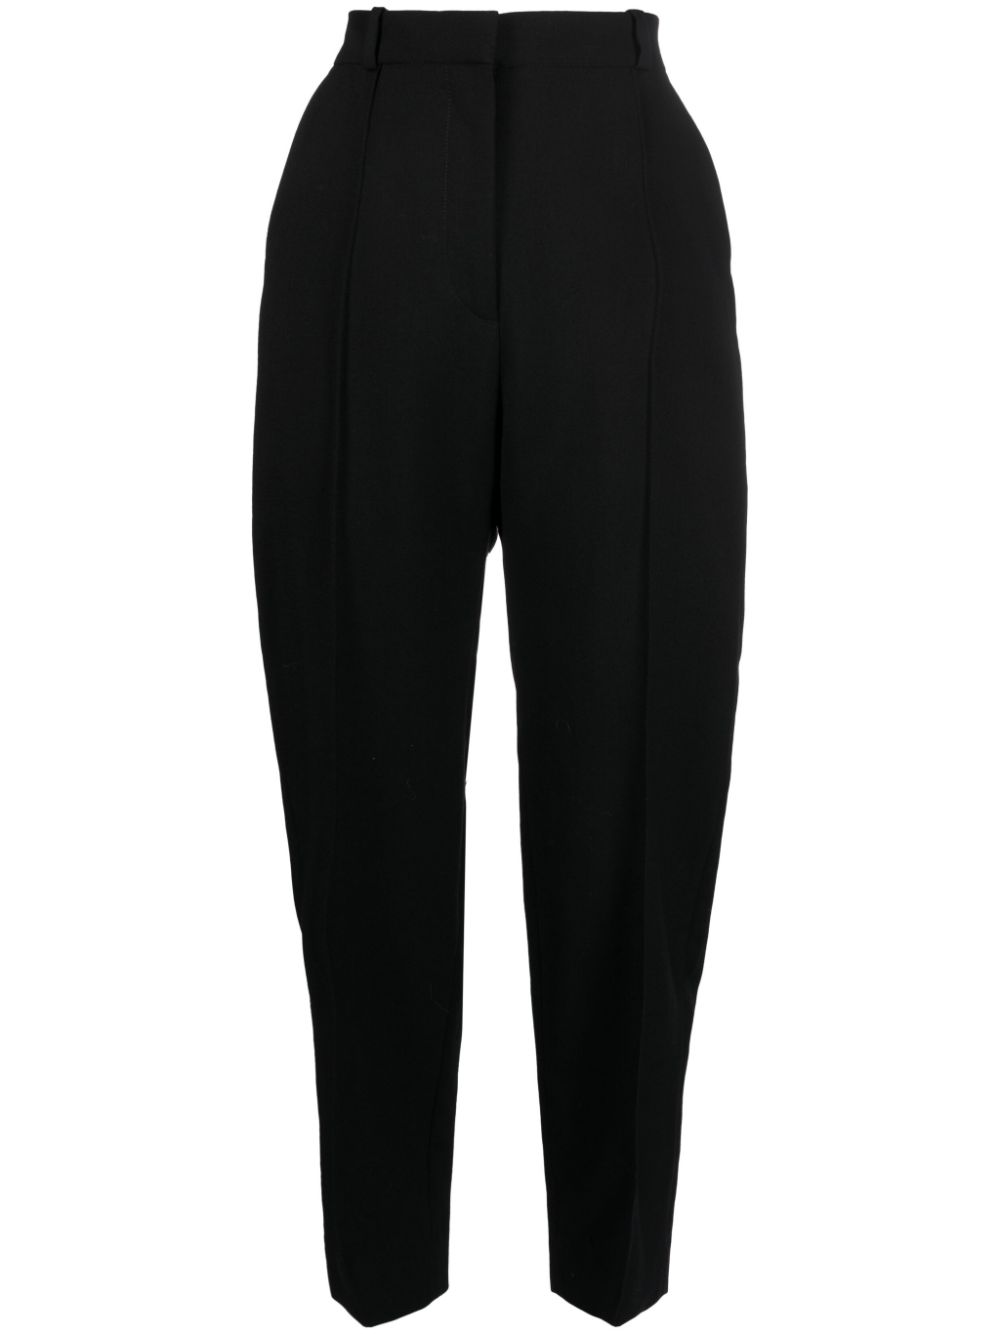 TOTEME tailored tapered trousers - Black von TOTEME